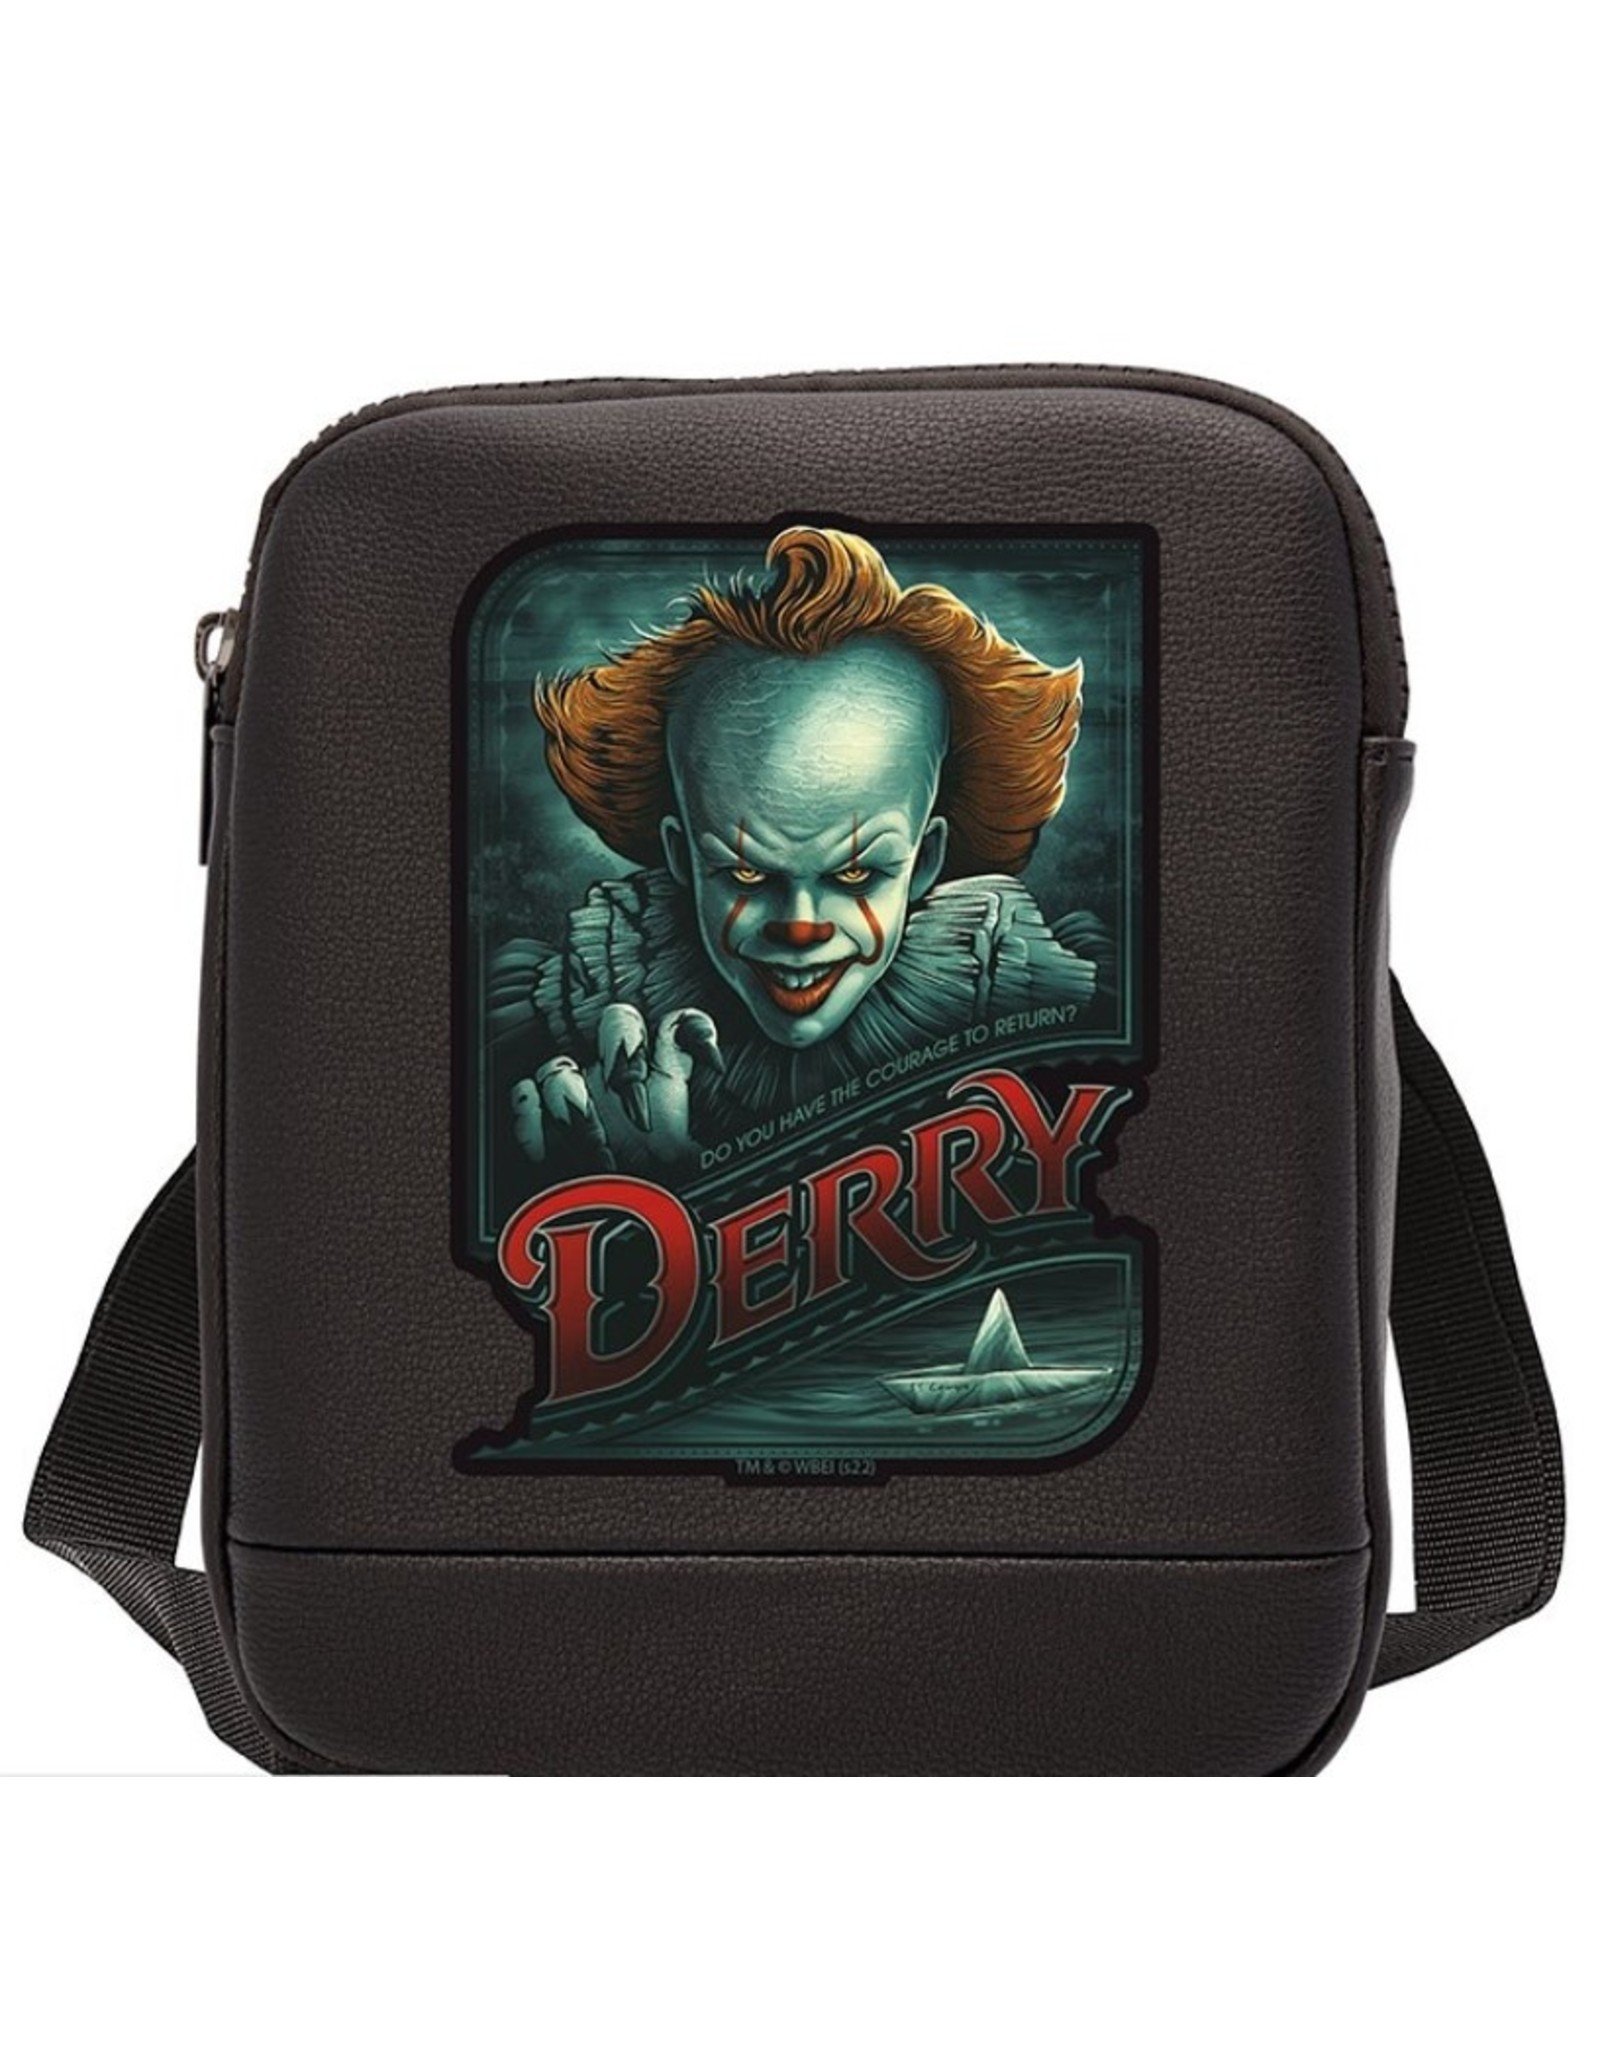 IT Merchandise bags - IT Pennywise Messenger Bag "Derry"